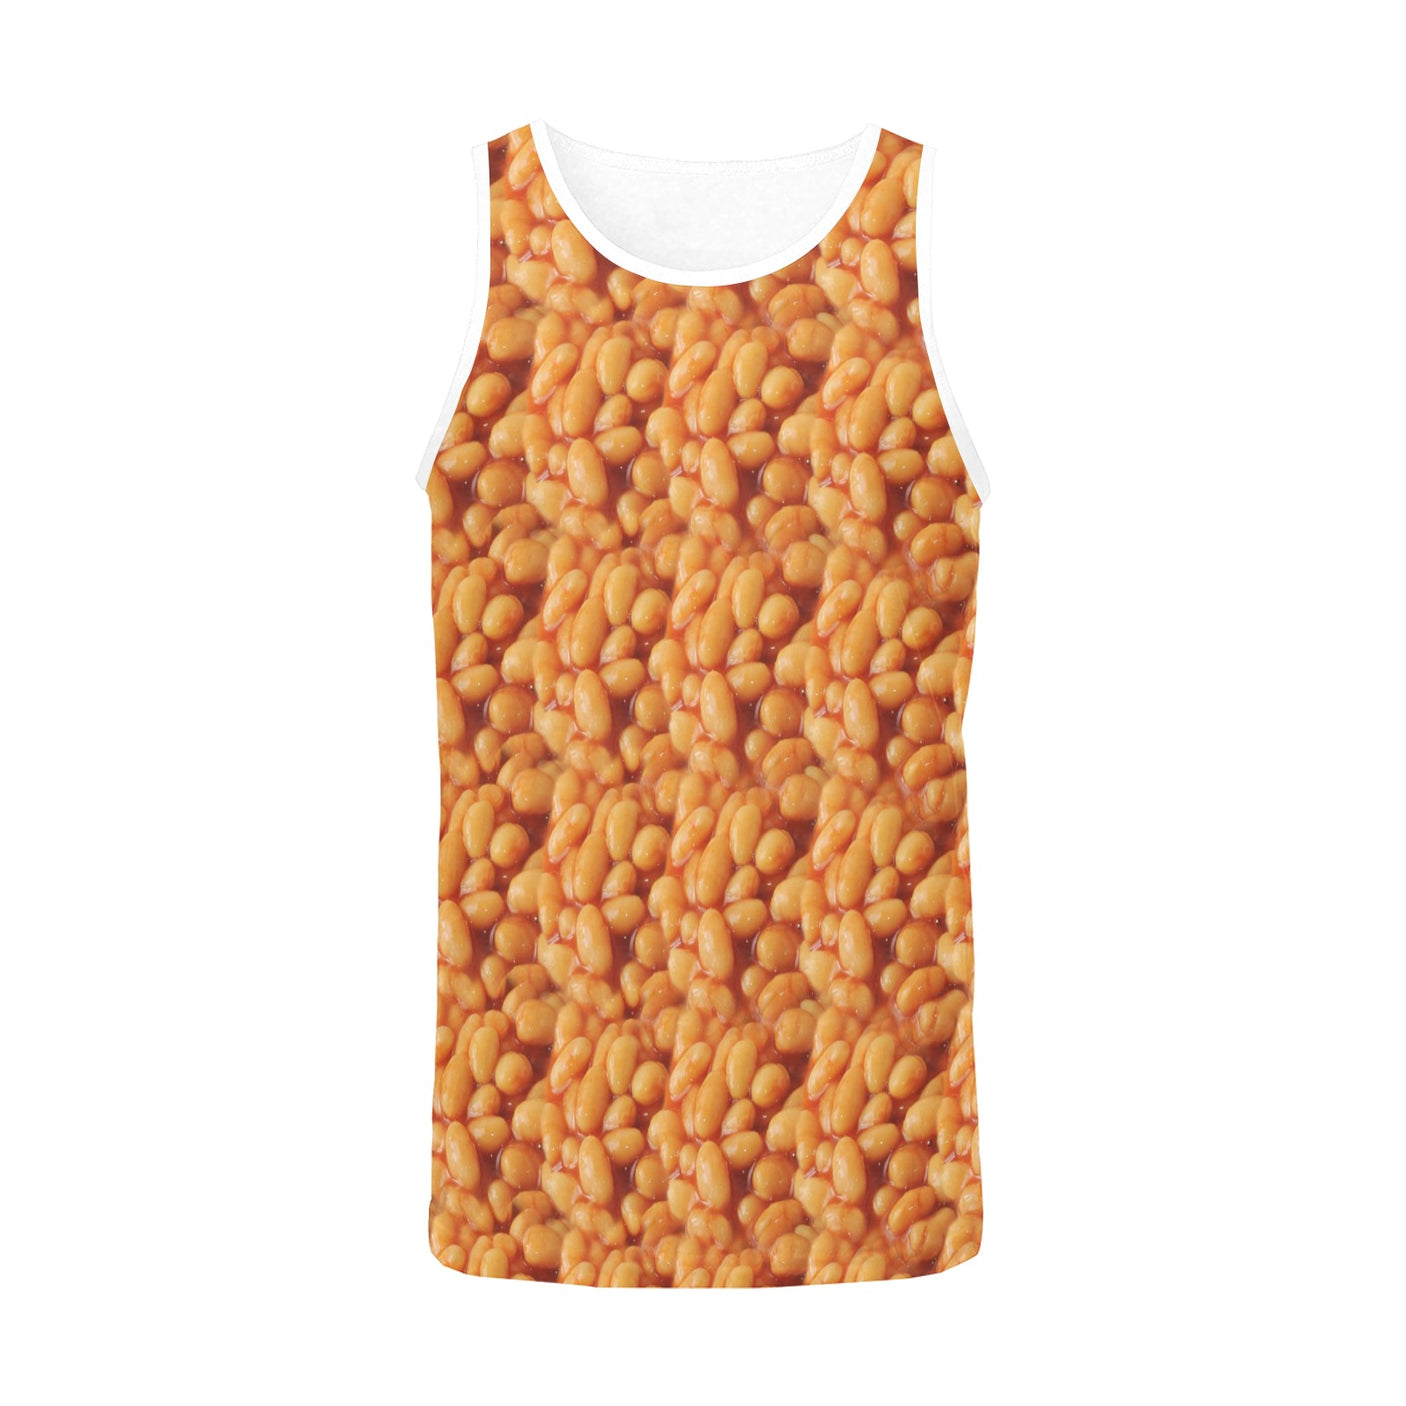 Baked Beans Tank Top